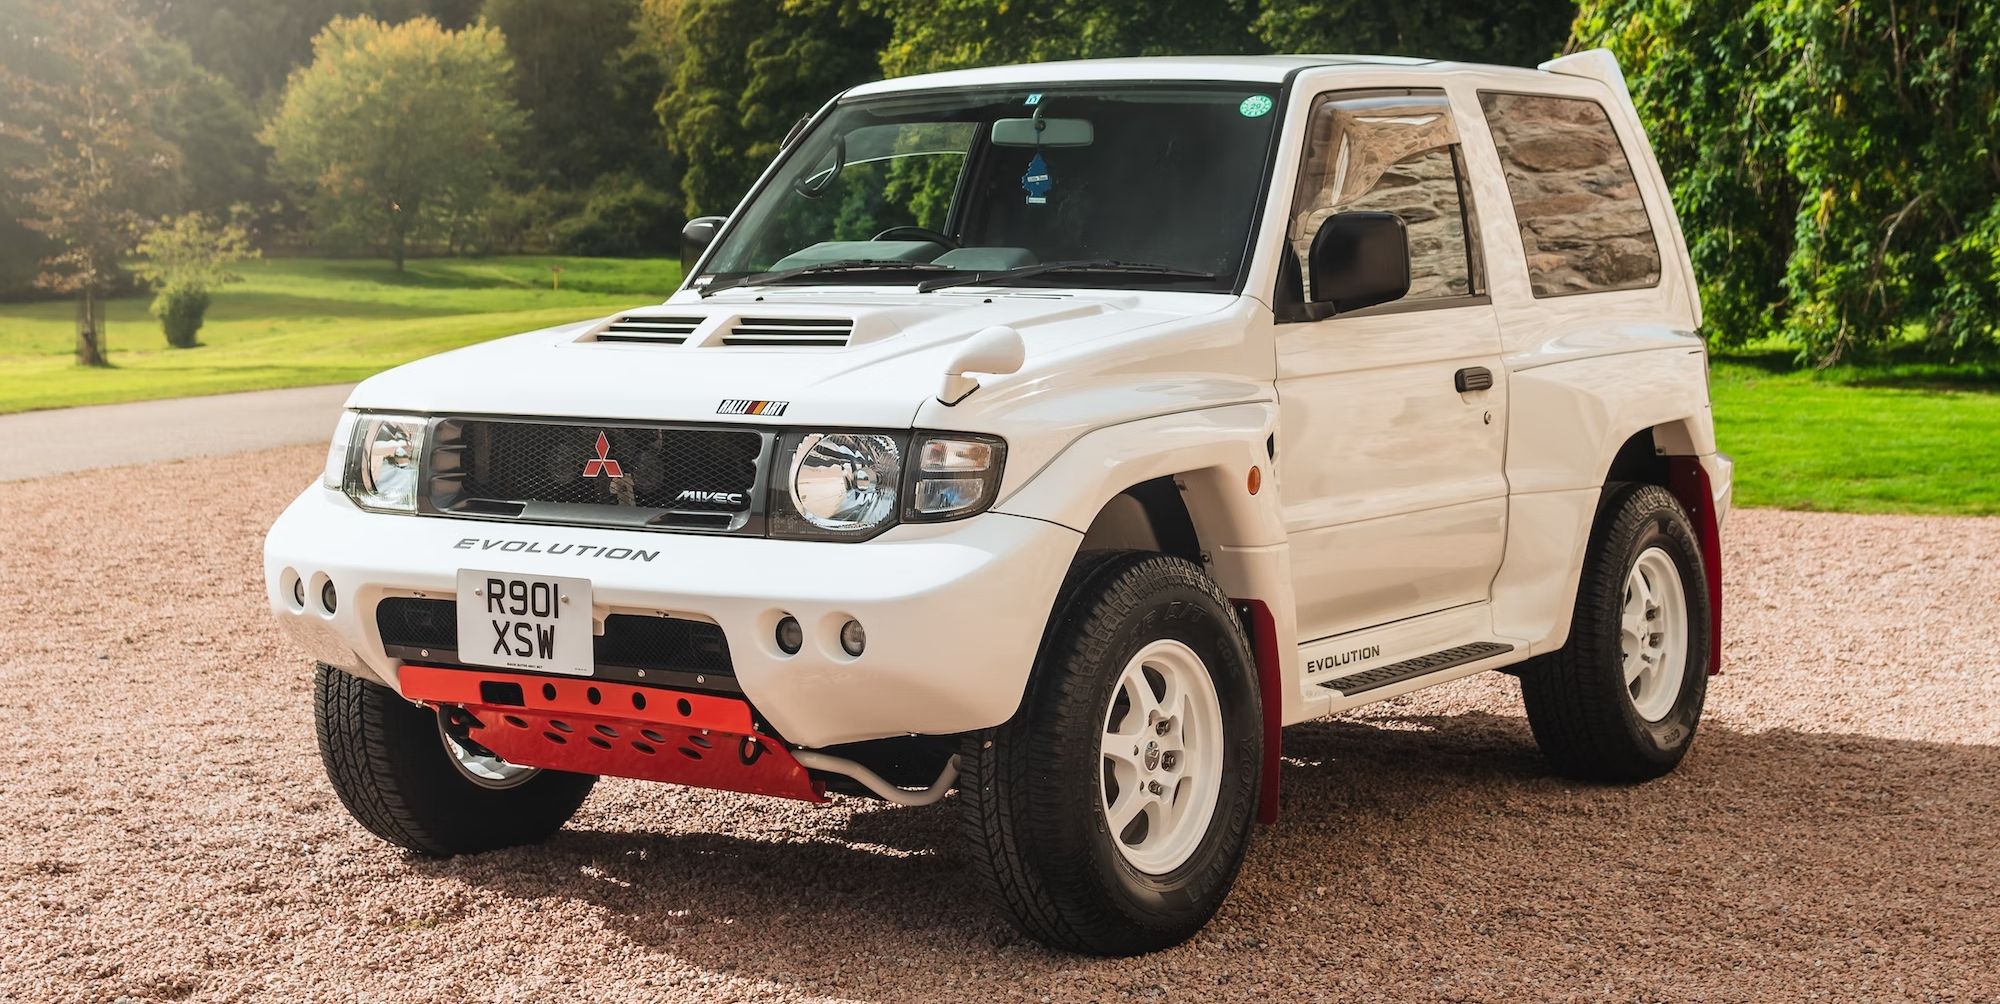 Buy This Glorious Pajero Evolution, Live Out JDM Off-Road Dreams